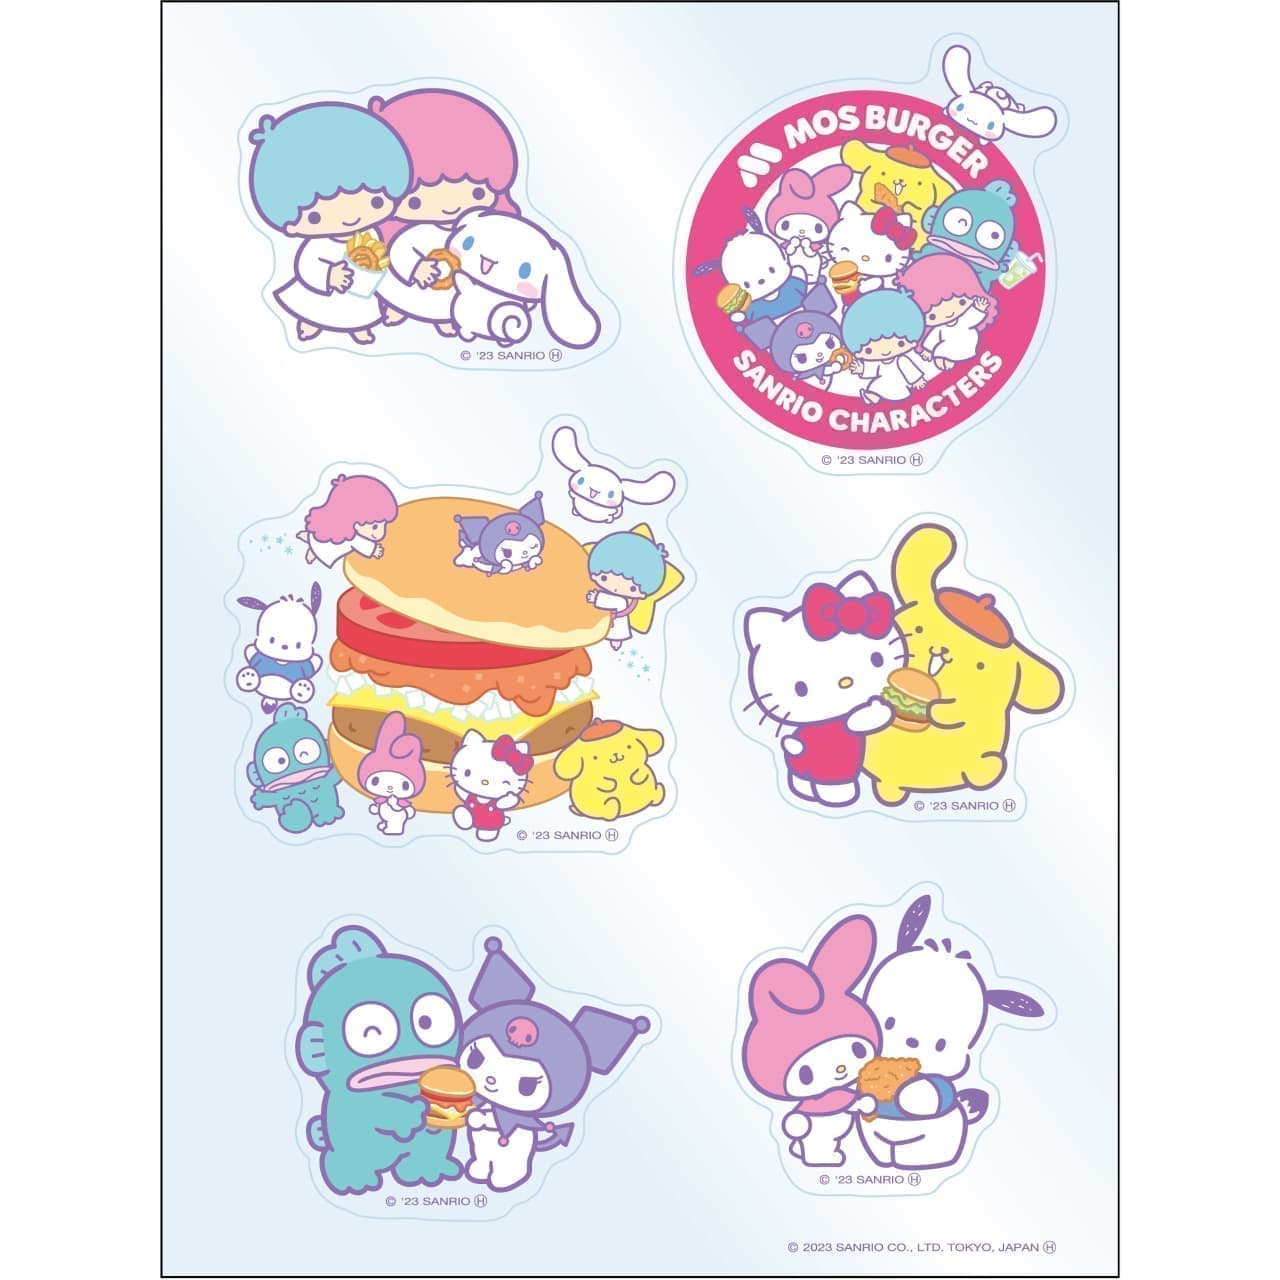 Mos Burger "Sanrio Characters" collaboration toy clear sticker